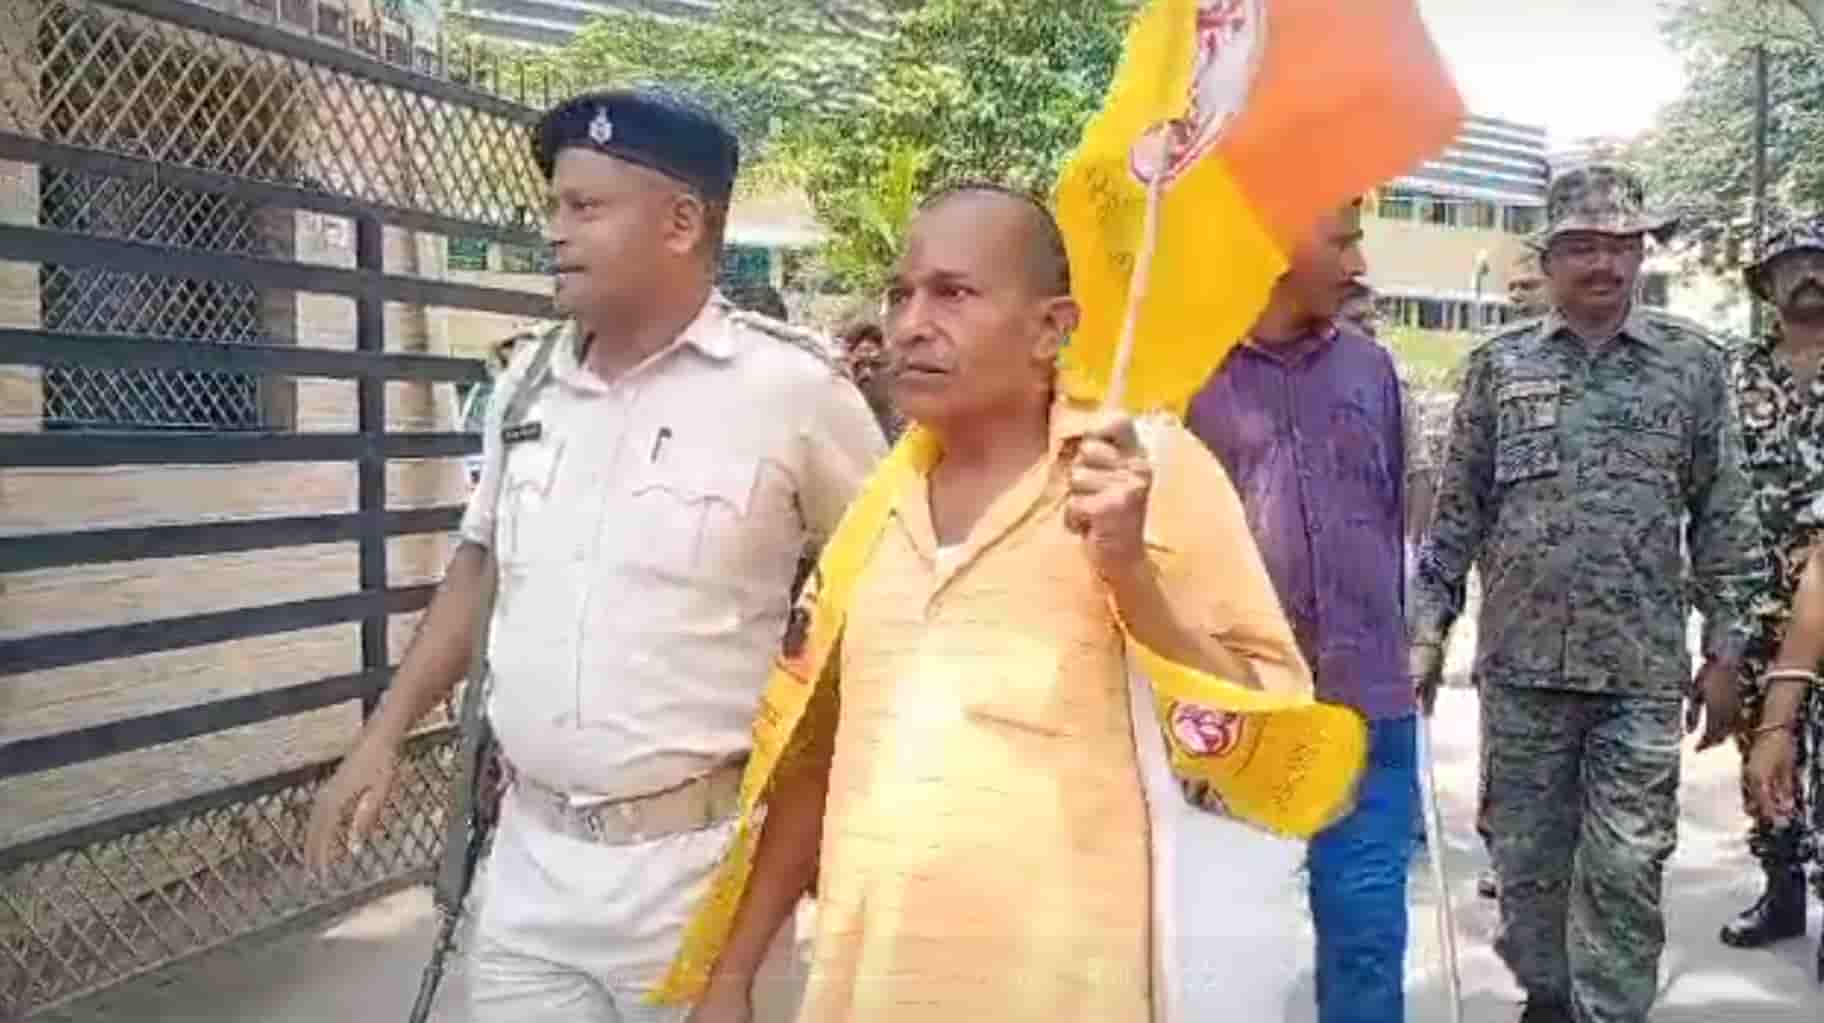 self immolation1 Jharkhand Town Post's persistent anti-corruption activist Ajit Kumar Sao, frustrated by a decade of inaction, attempted self-immolation only to be arrested at the Jamshedpur district headquarters.